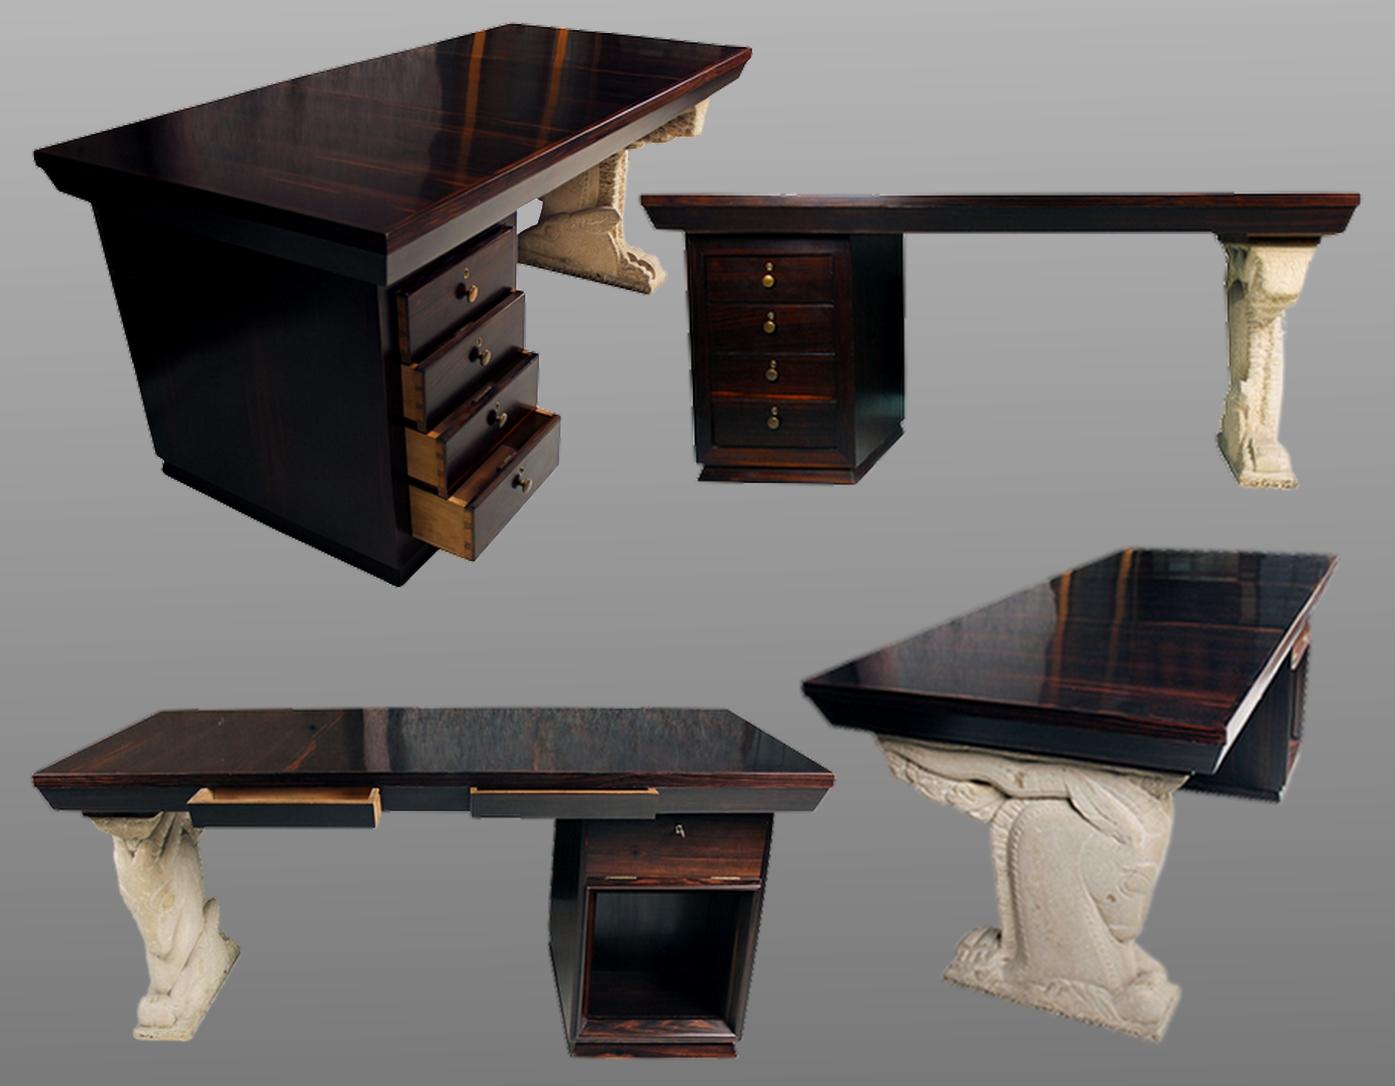 Beautiful double-sided Art Deco period desk in Macassar ebony, which one of the legs is a stone sculpture by Pierre Fournier des Corats (1884-1953). Signed.